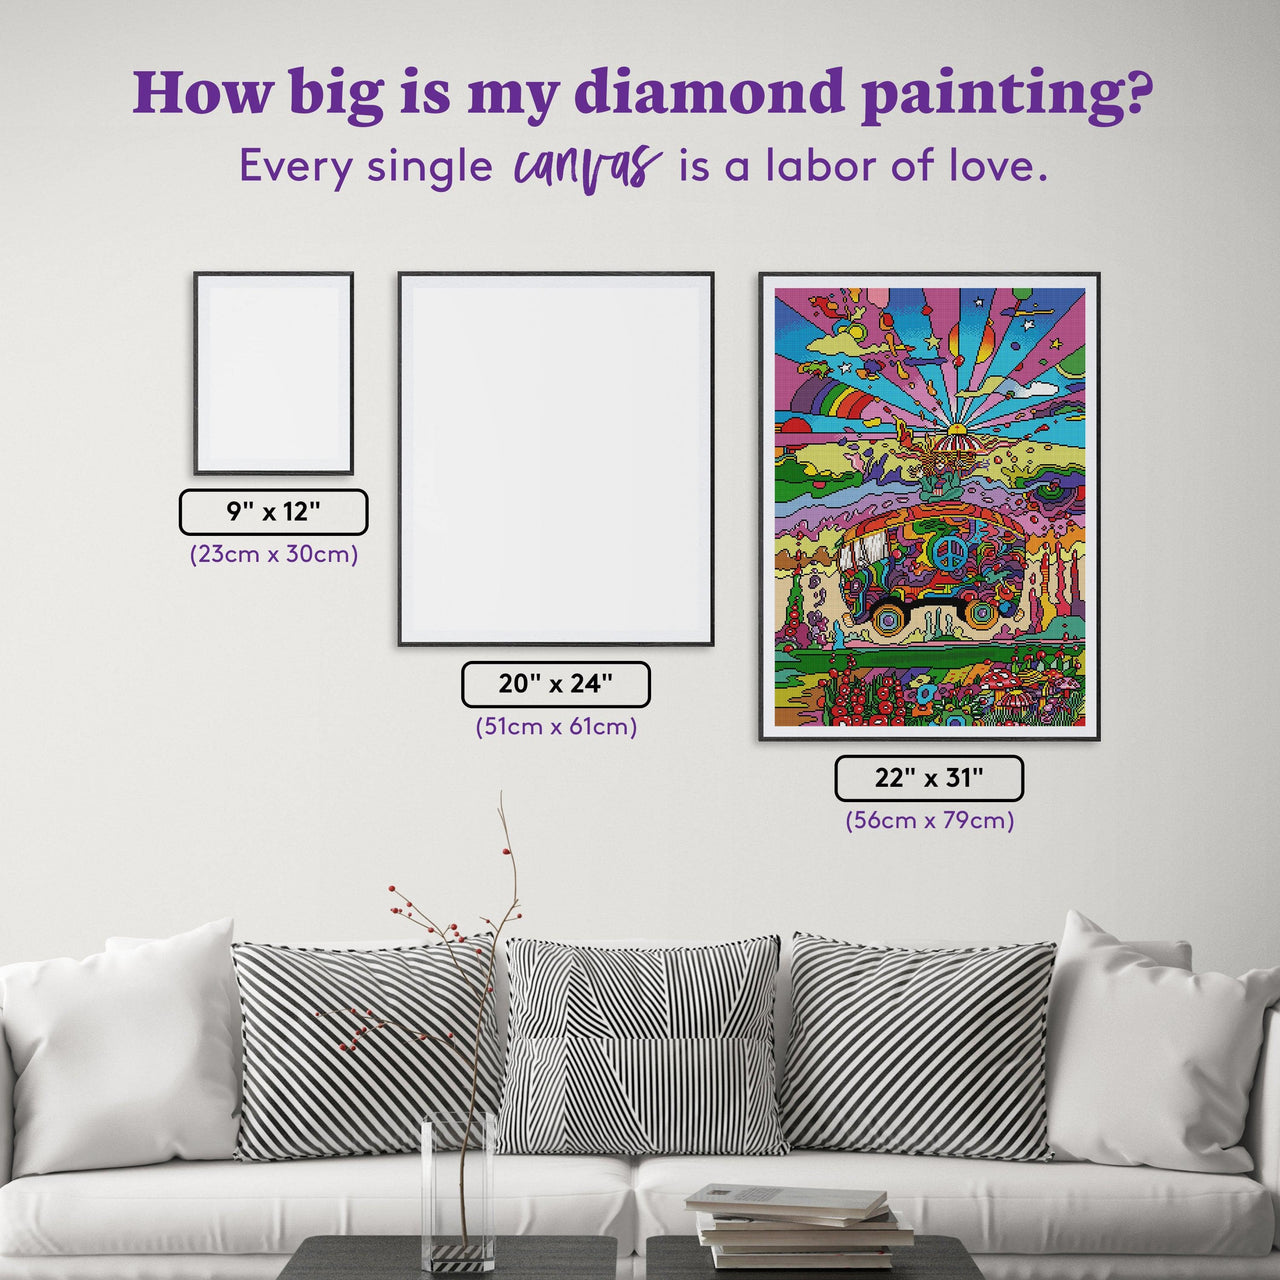 Diamond Painting Magic Bus 22" x 31" (56cm x 79cm) / Square with 46 Colors including 4 ABs / 70,784